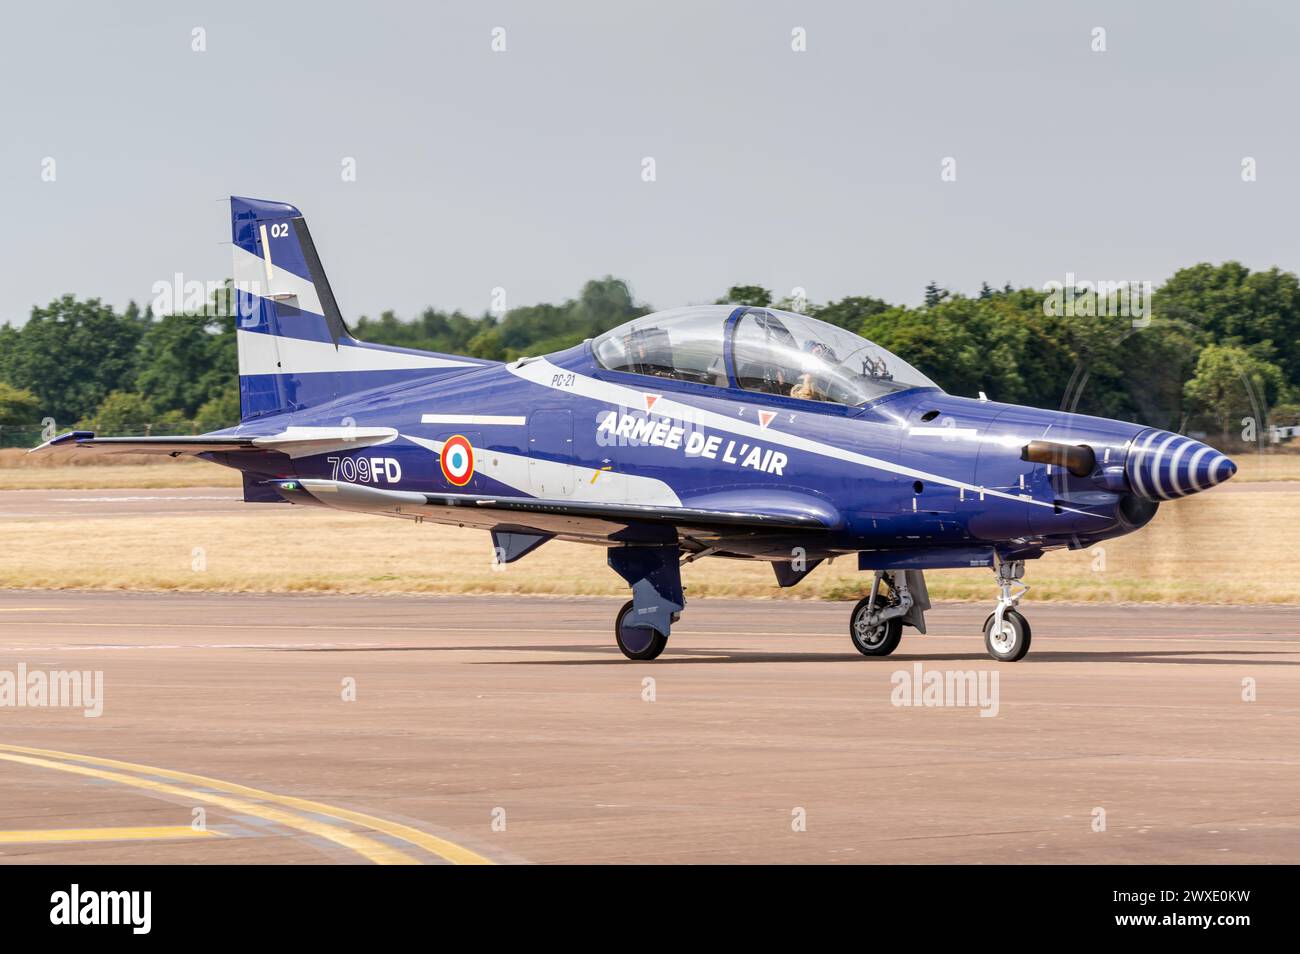 A Pilatus PC-21 advanced trainer aircraft of the French Air and Space Force. Stock Photo